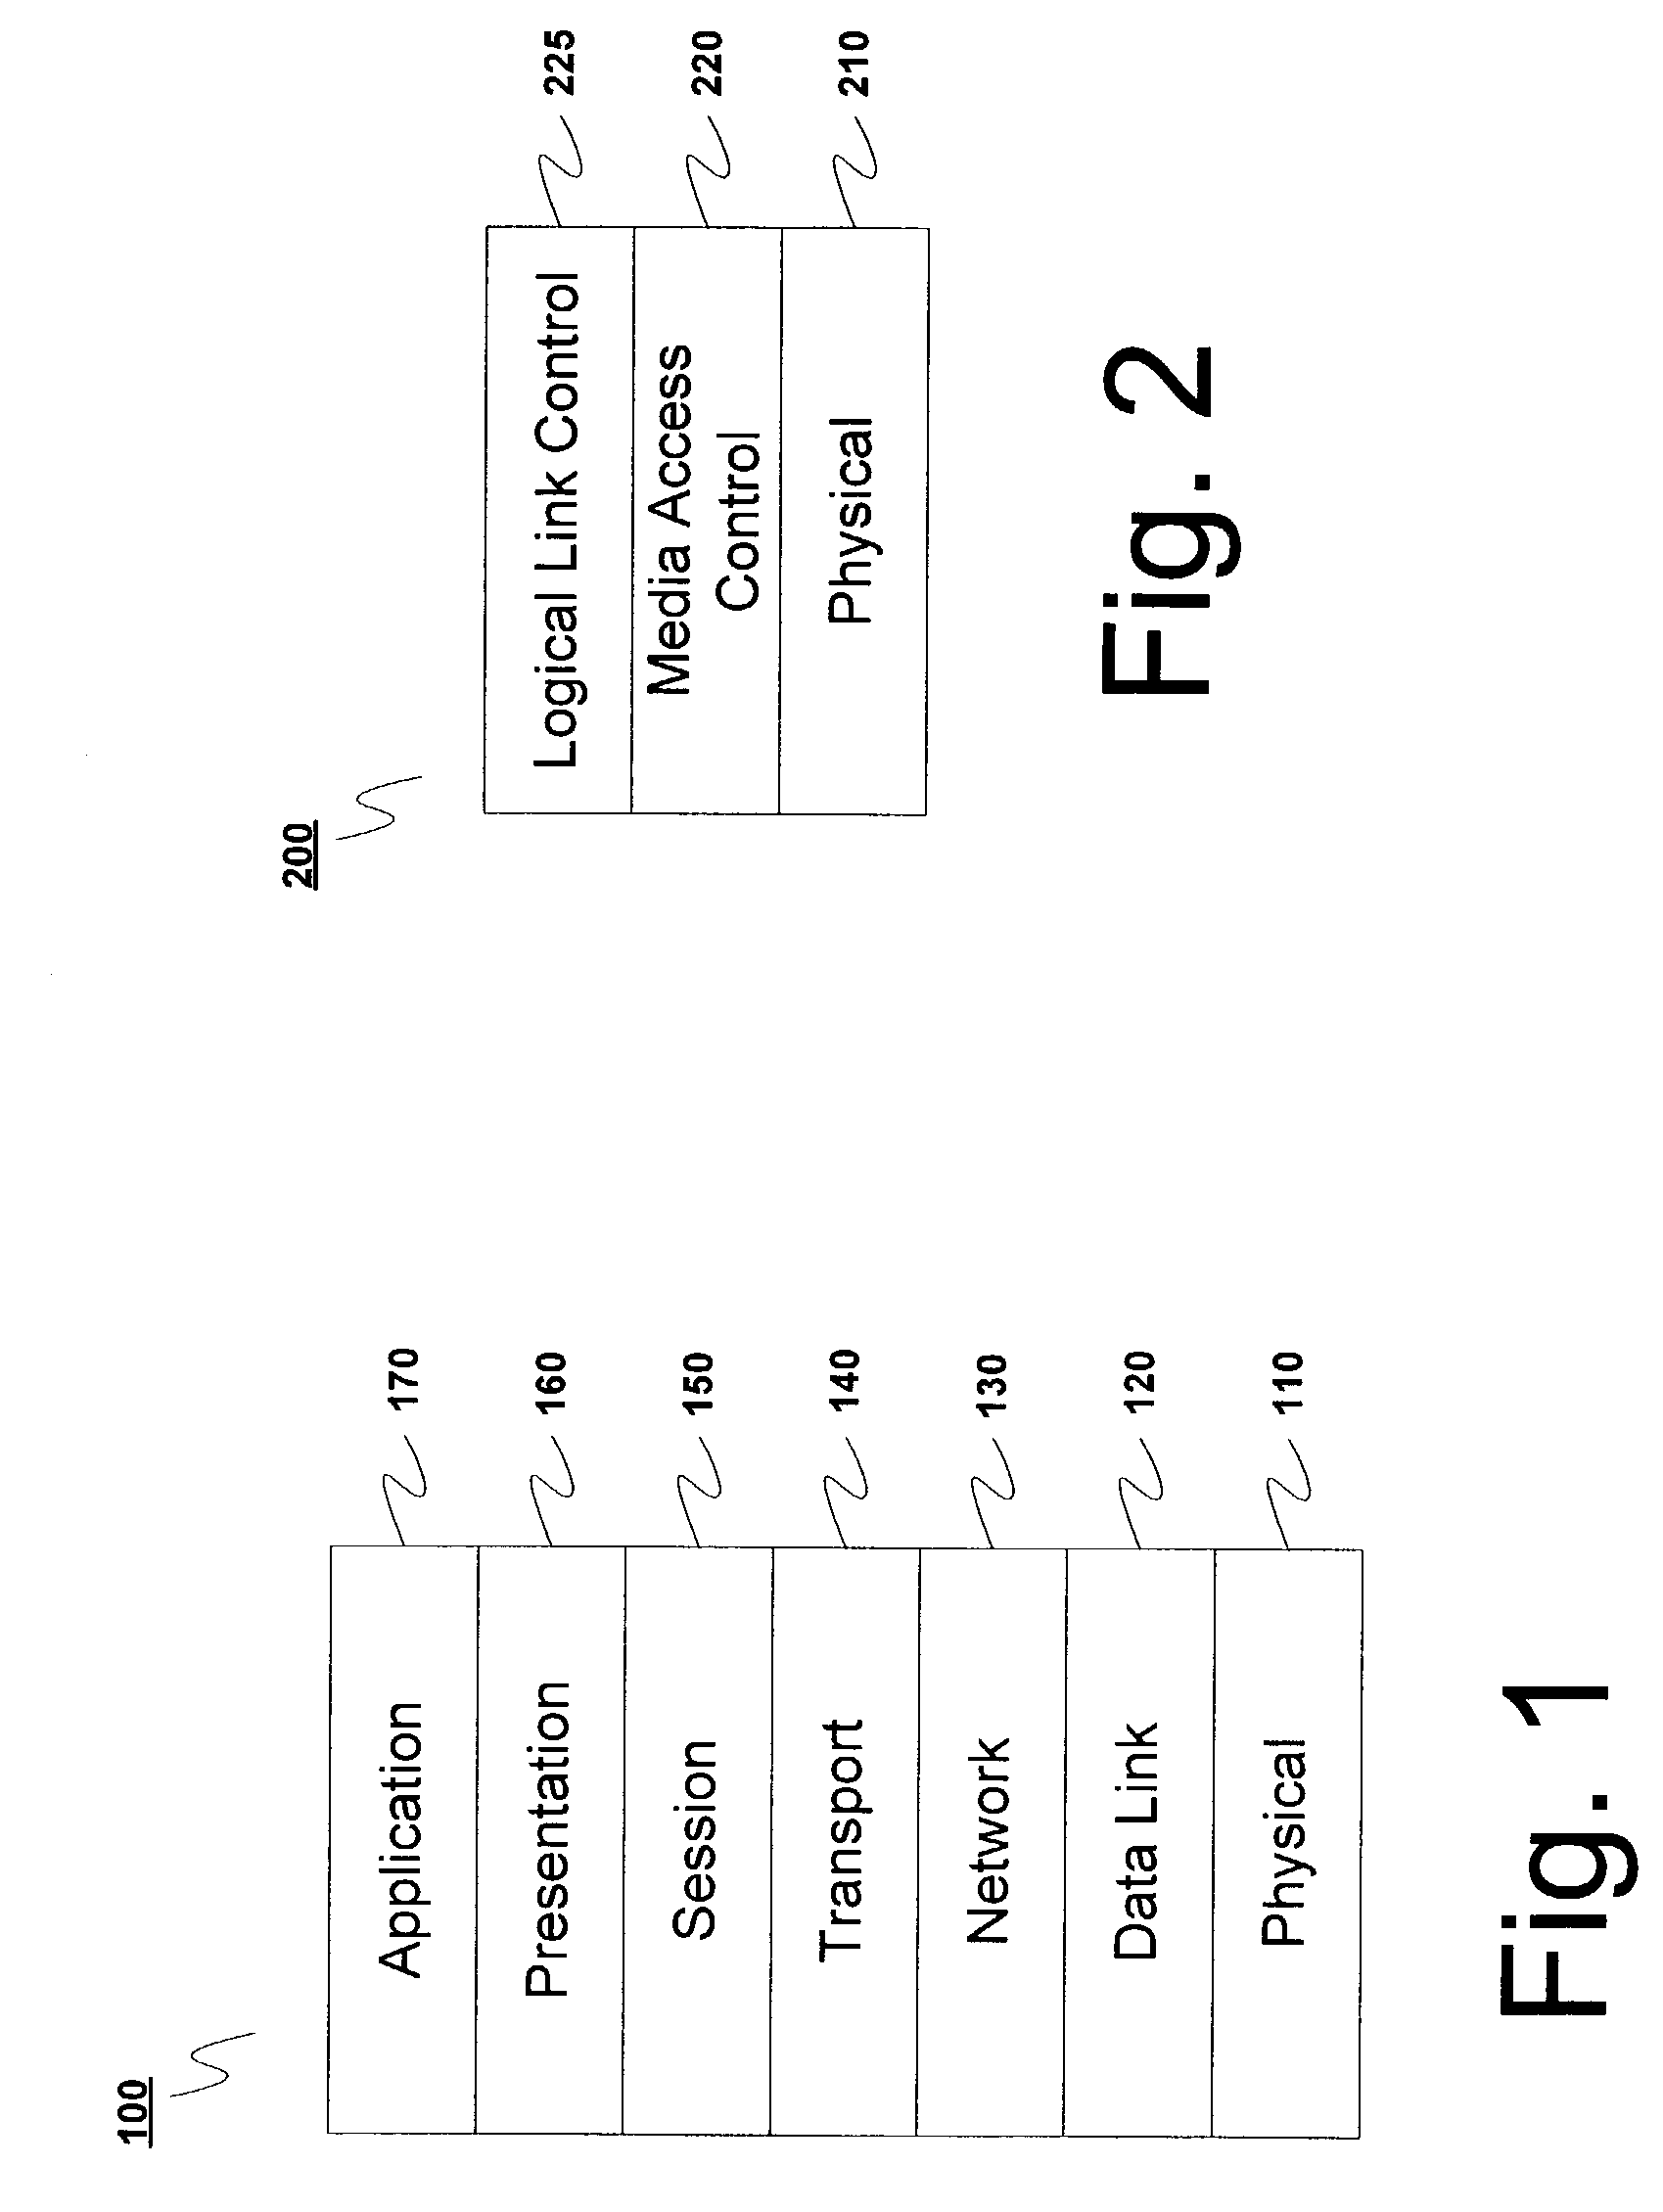 System and method for providing device authentication in a wireless network